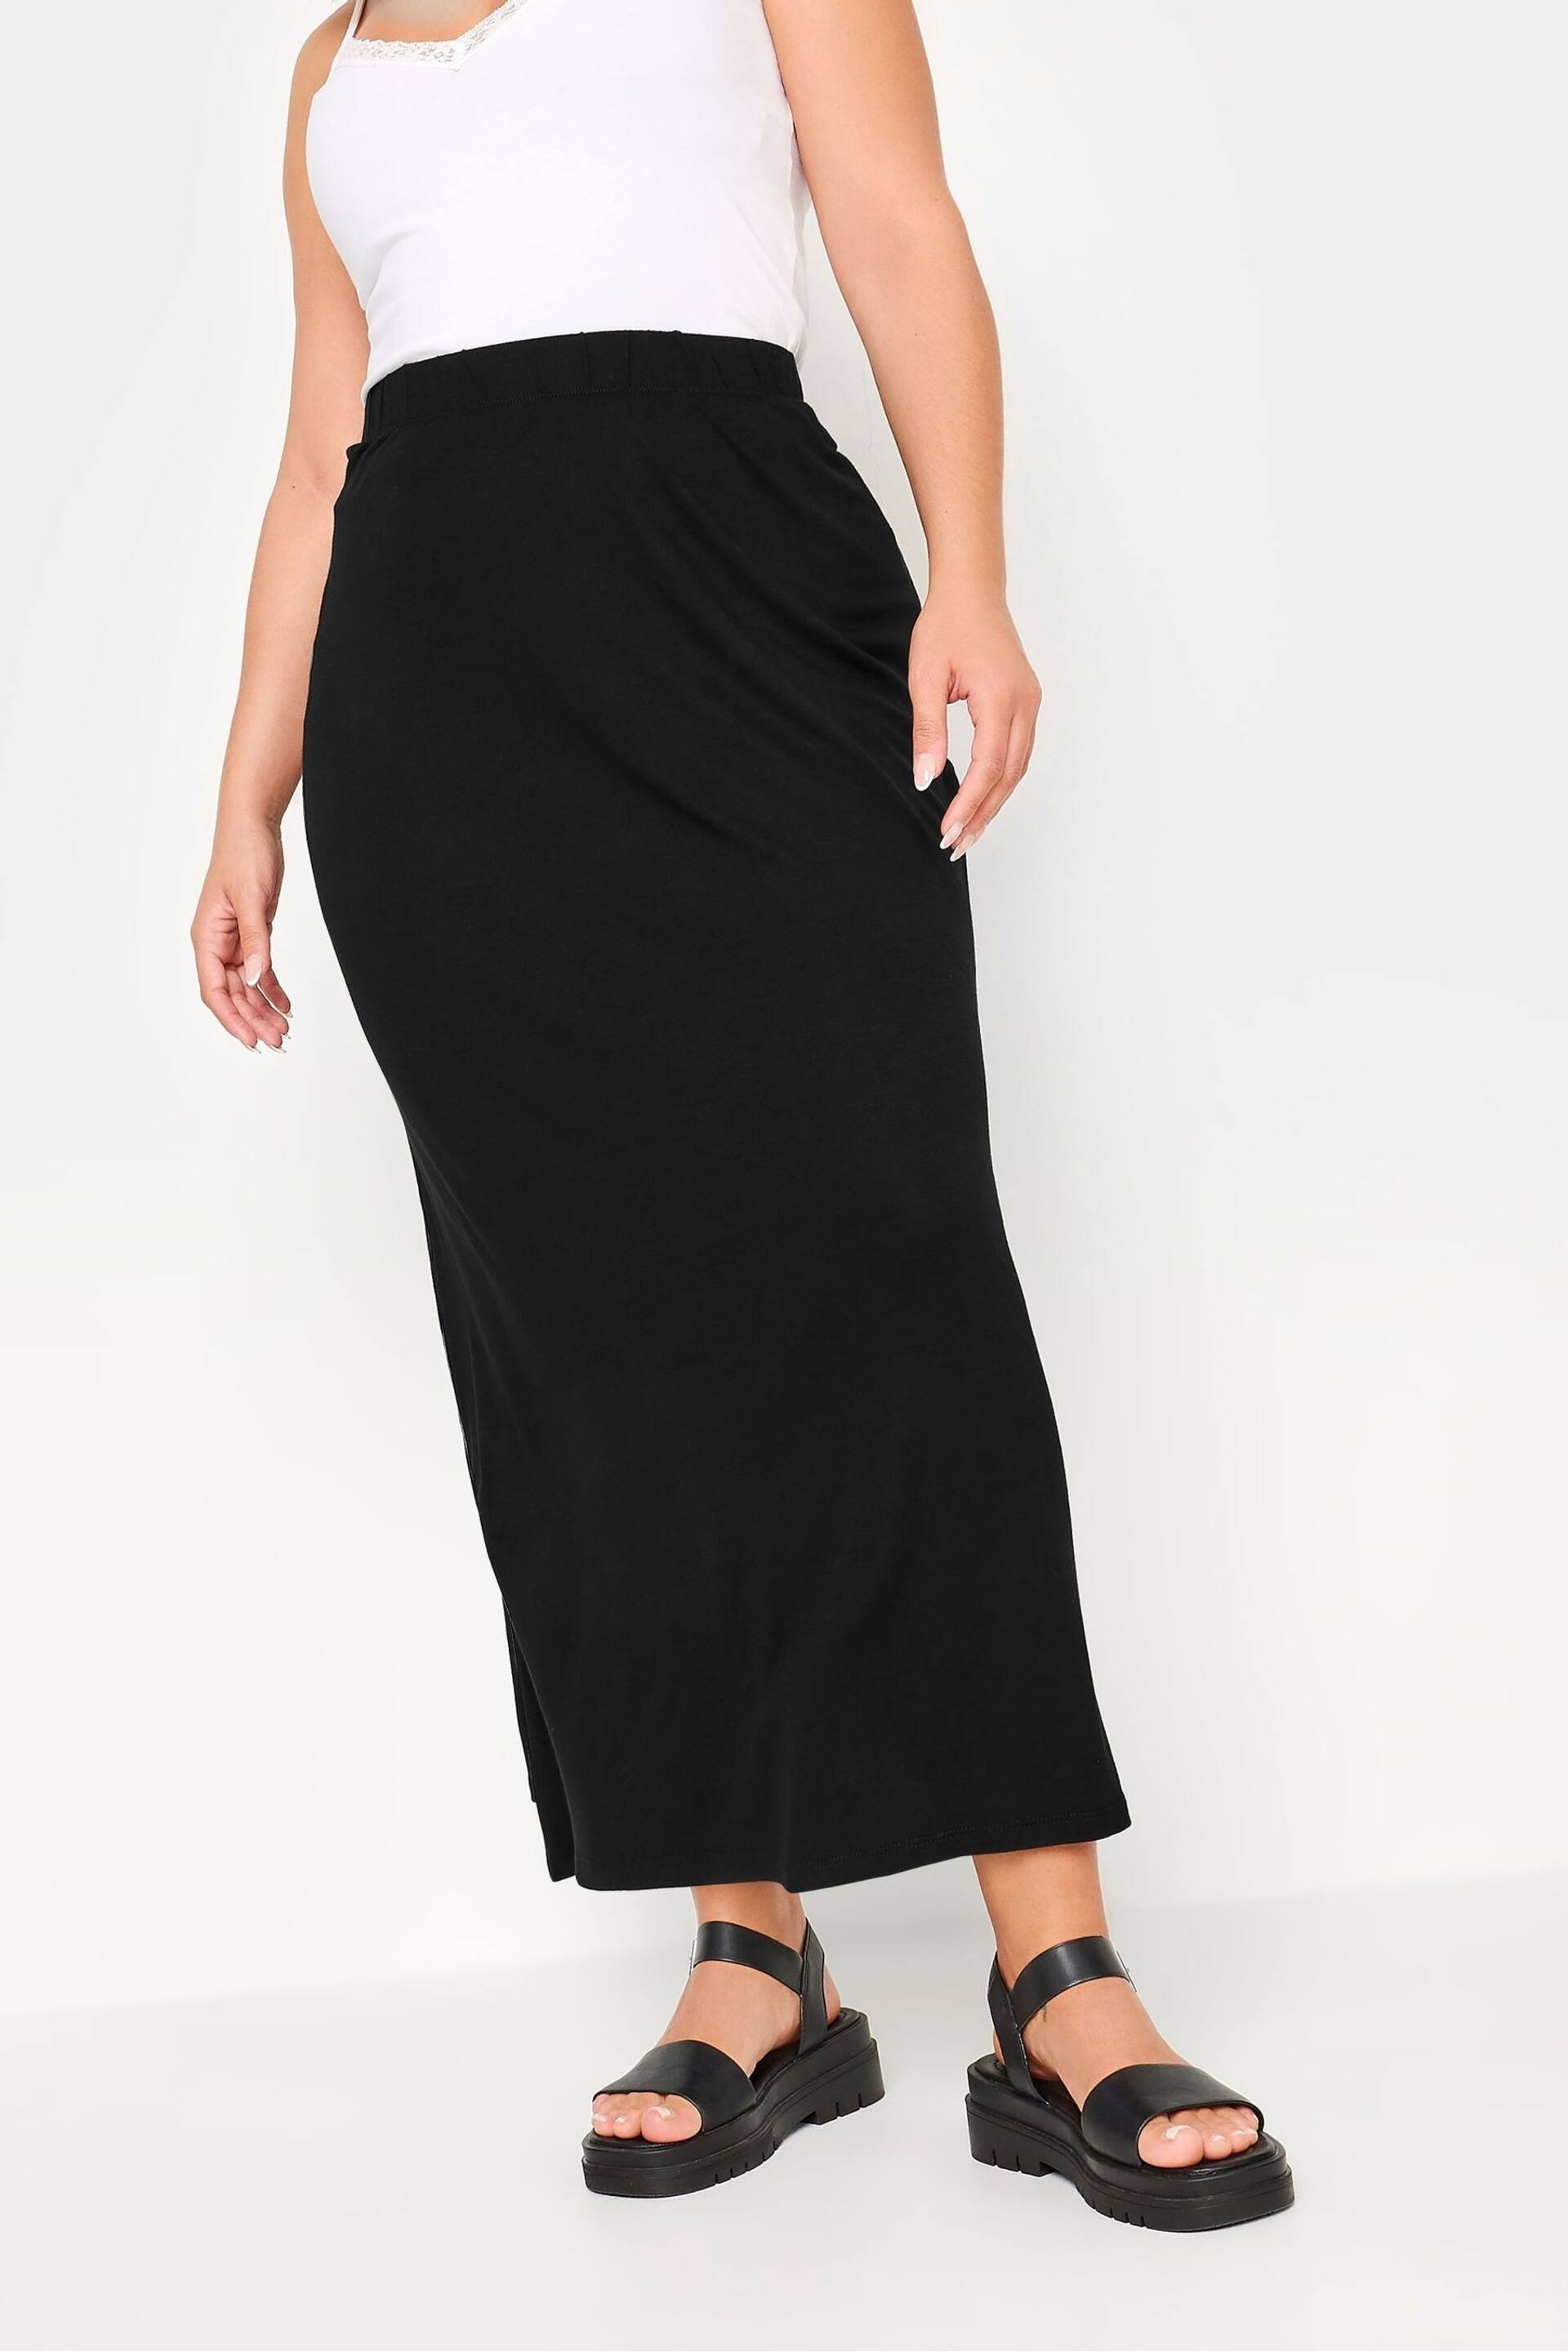 Yours Curve Black Tube Maxi Skirt - Image 1 of 5